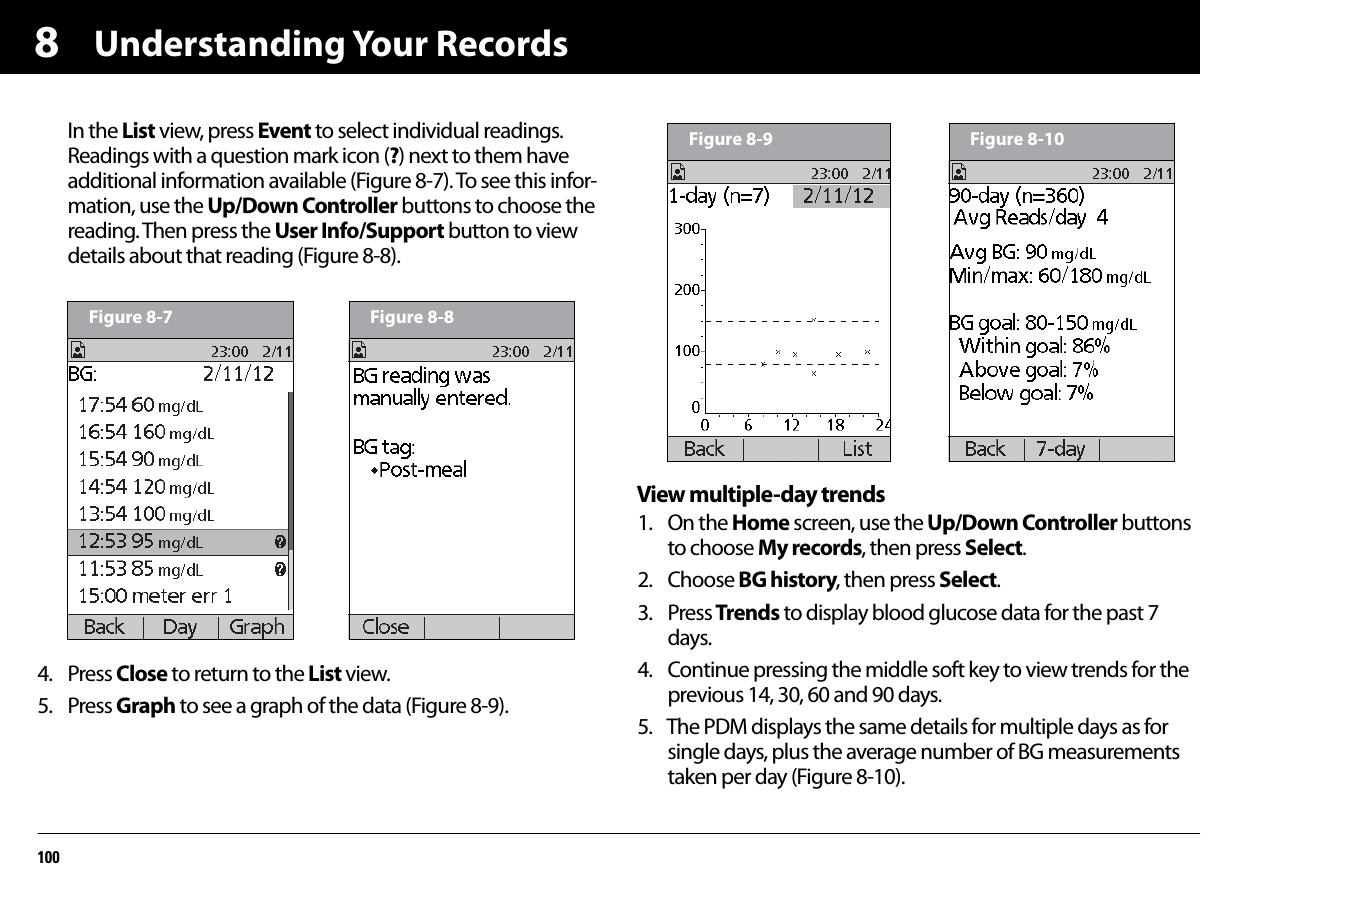 Understanding Your Records1008In the List view, press Event to select individual readings. Readings with a question mark icon (?) next to them have additional information available (Figure 8-7). To see this infor-mation, use the Up/Down Controller buttons to choose the reading. Then press the User Info/Support button to view details about that reading (Figure 8-8).4. Press Close to return to the List view.5. Press Graph to see a graph of the data (Figure 8-9).View multiple-day trends1. On the Home screen, use the Up/Down Controller buttons to choose My records, then press Select.2. Choose BG history, then press Select.3. Press Trends to display blood glucose data for the past 7 days.4. Continue pressing the middle soft key to view trends for the previous 14, 30, 60 and 90 days.5. The PDM displays the same details for multiple days as for single days, plus the average number of BG measurements taken per day (Figure 8-10). Figure 8-7 Figure 8-8Figure 8-9 Figure 8-10